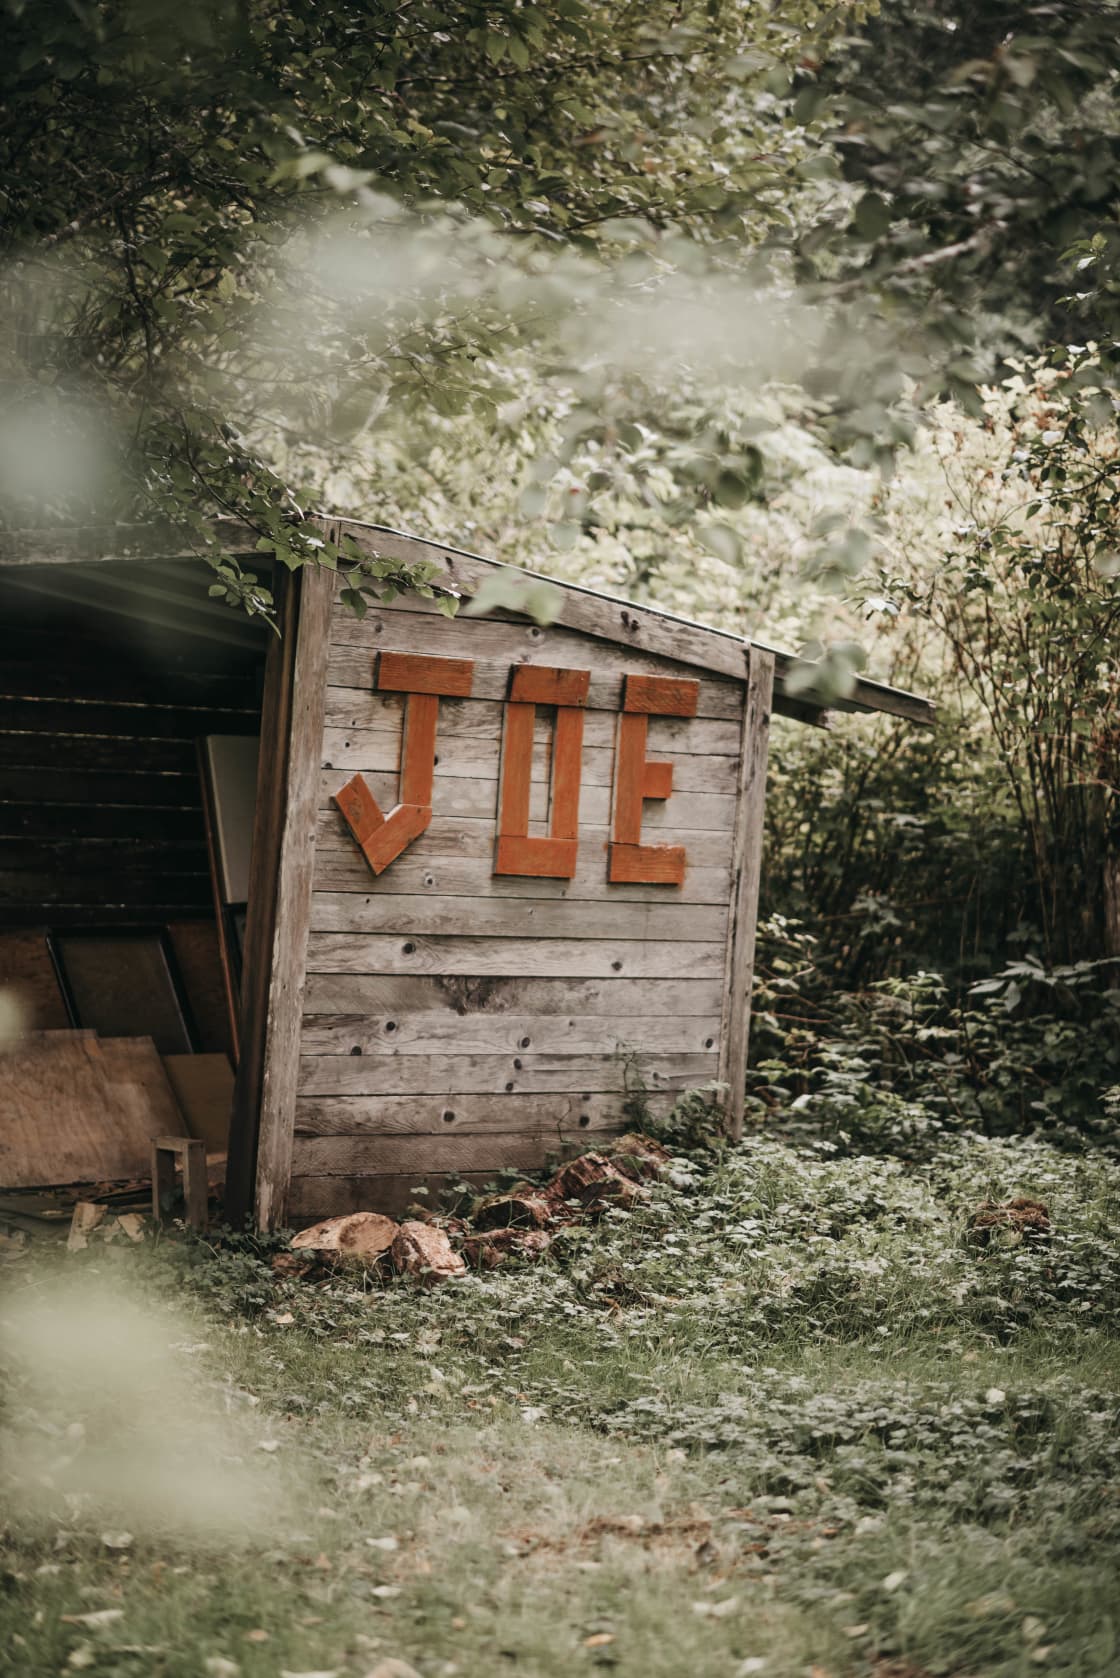 Woodshed that says JOE, not sure why -but It's neat! 